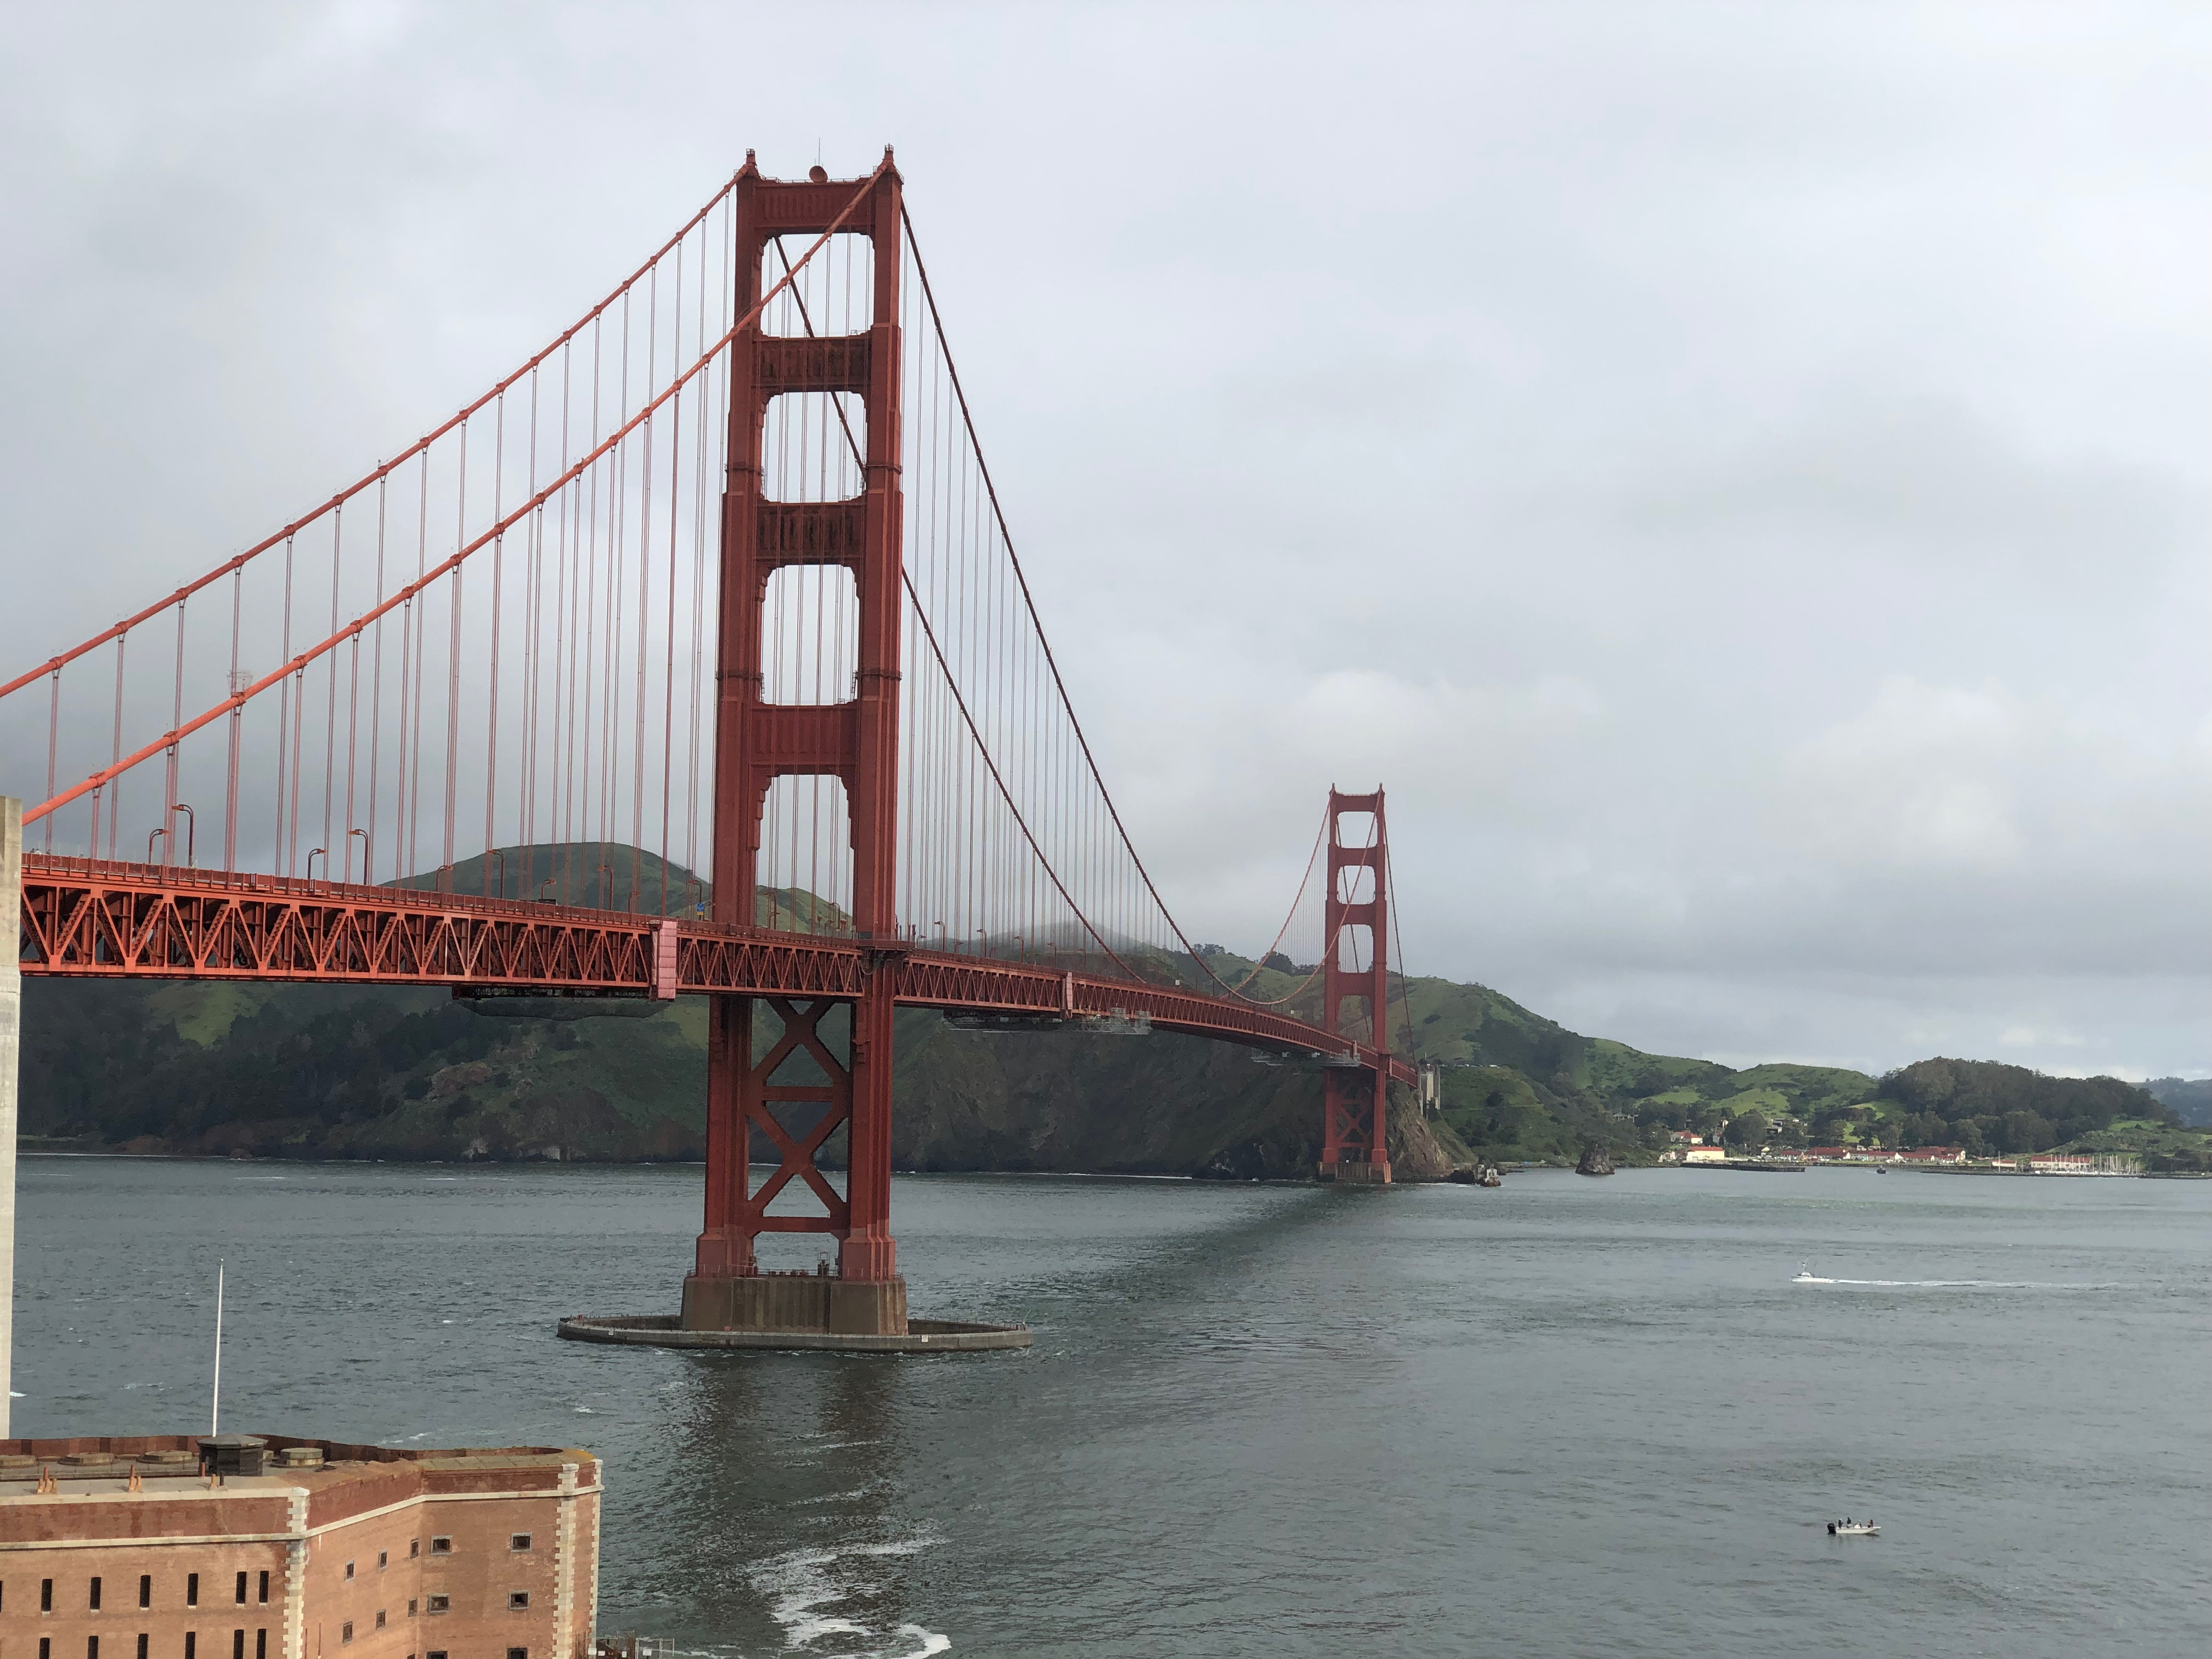 View of the Golden Gate Bridge from the Golden Gate Post Card Viewpoint